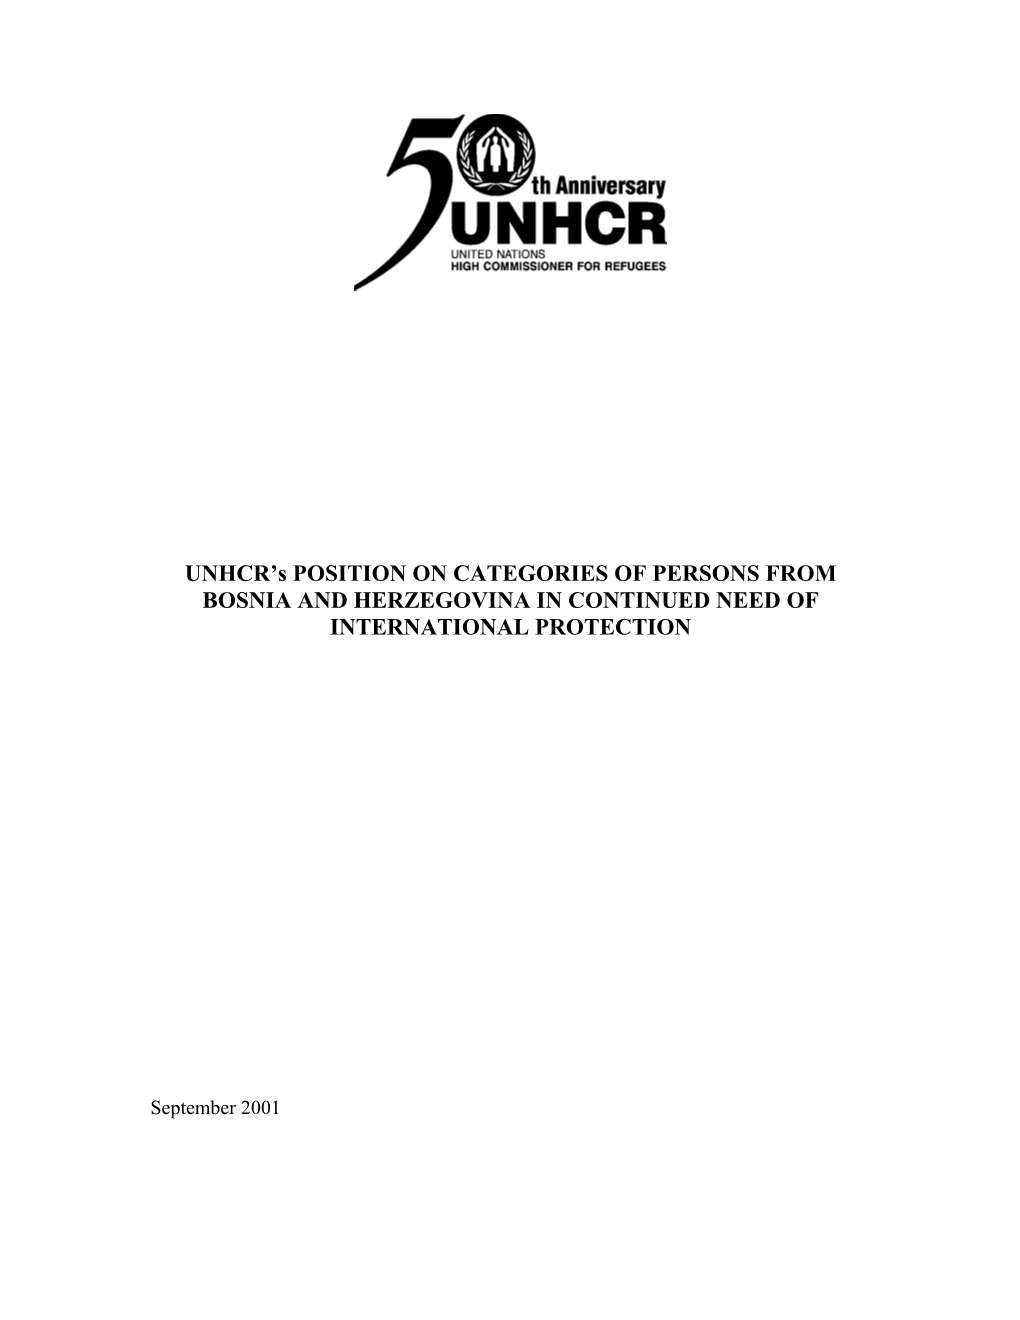 UNHCR's Position on Categories of Persons from Bosnia And